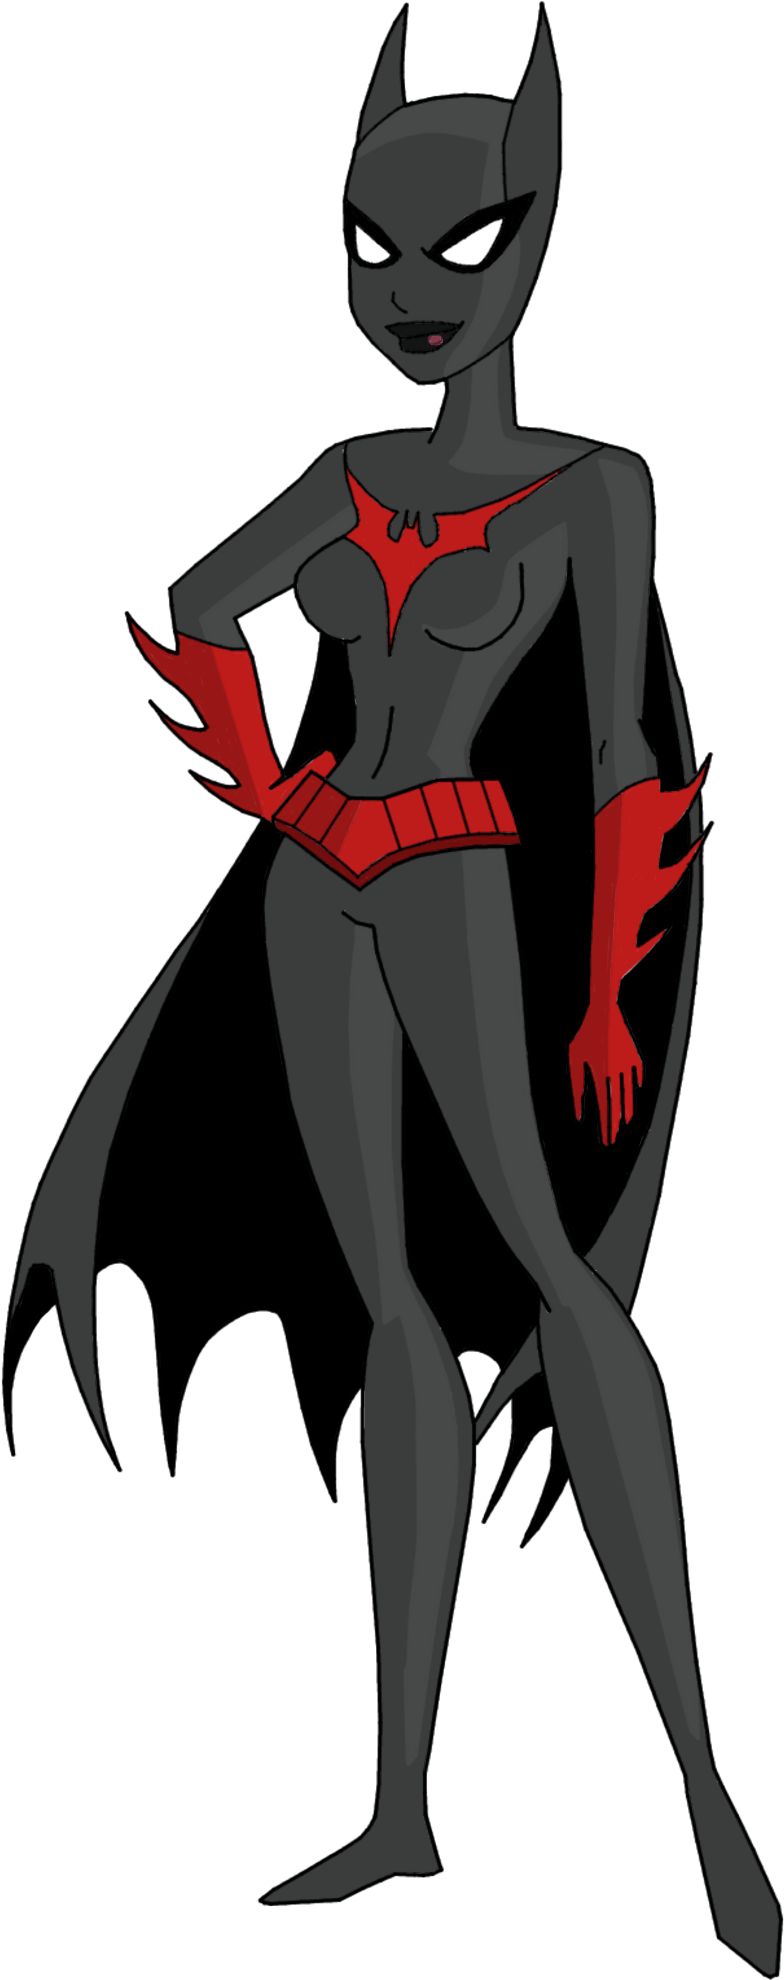 Batwoman By Therealfb1 By Therealfb1 - Justice League (1024x2048)